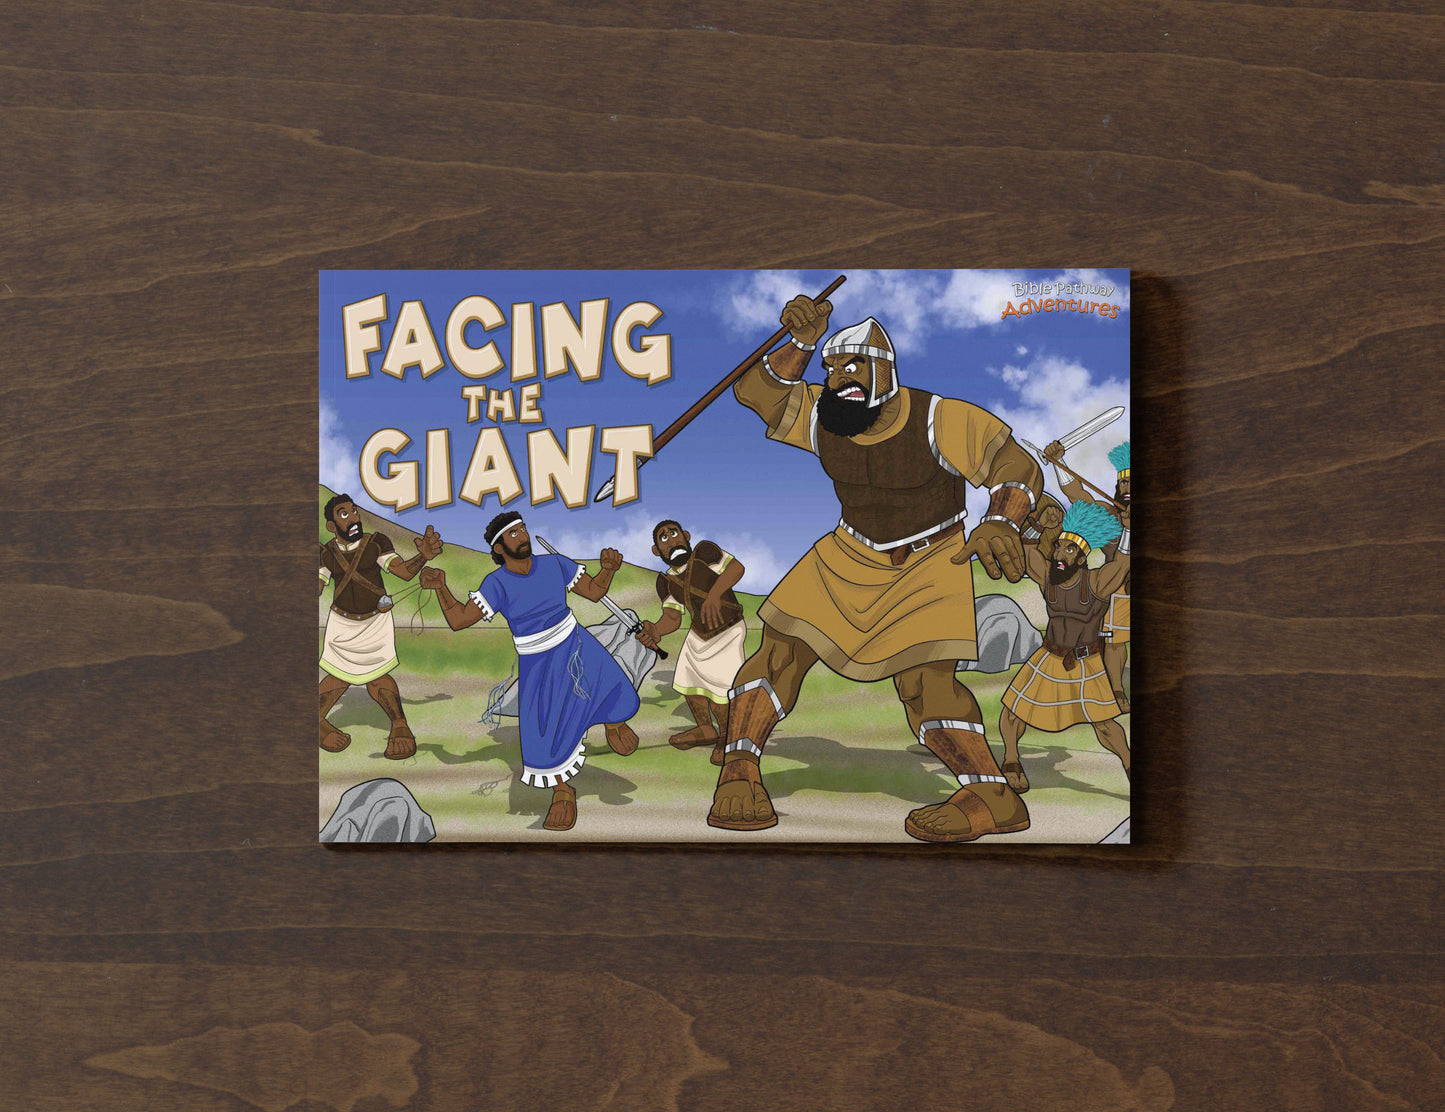 Facing the Giant storybook (paperback)